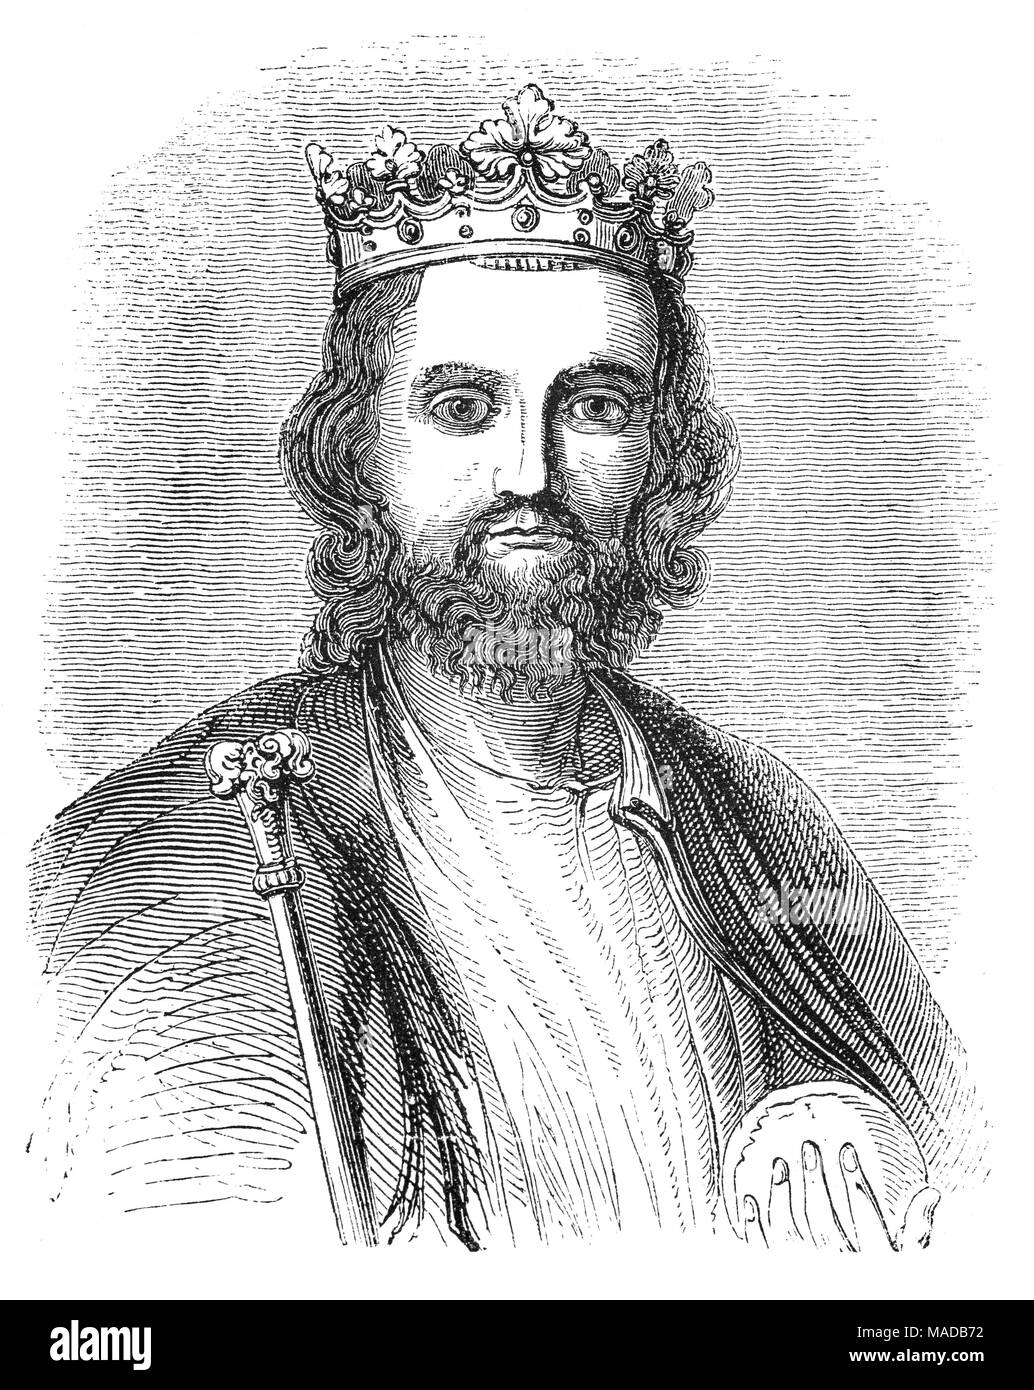 King Edward II (1284 – 1327), aka Edward of Carnarvon, was King of England from 1307 until deposed in January 1327. The fourth son of Edward I, Edward became the heir apparent to the throne following the death of his older brother Alphonso. Beginning in 1300, Edward accompanied his father on campaigns to pacify Scotland. He succeeded to the throne in 1307, following his father's death. In 1308, he married Isabella of France, the daughter of the powerful King Philip IV, as part of a long-running effort to resolve the tensions between the English and French crowns. Stock Photo